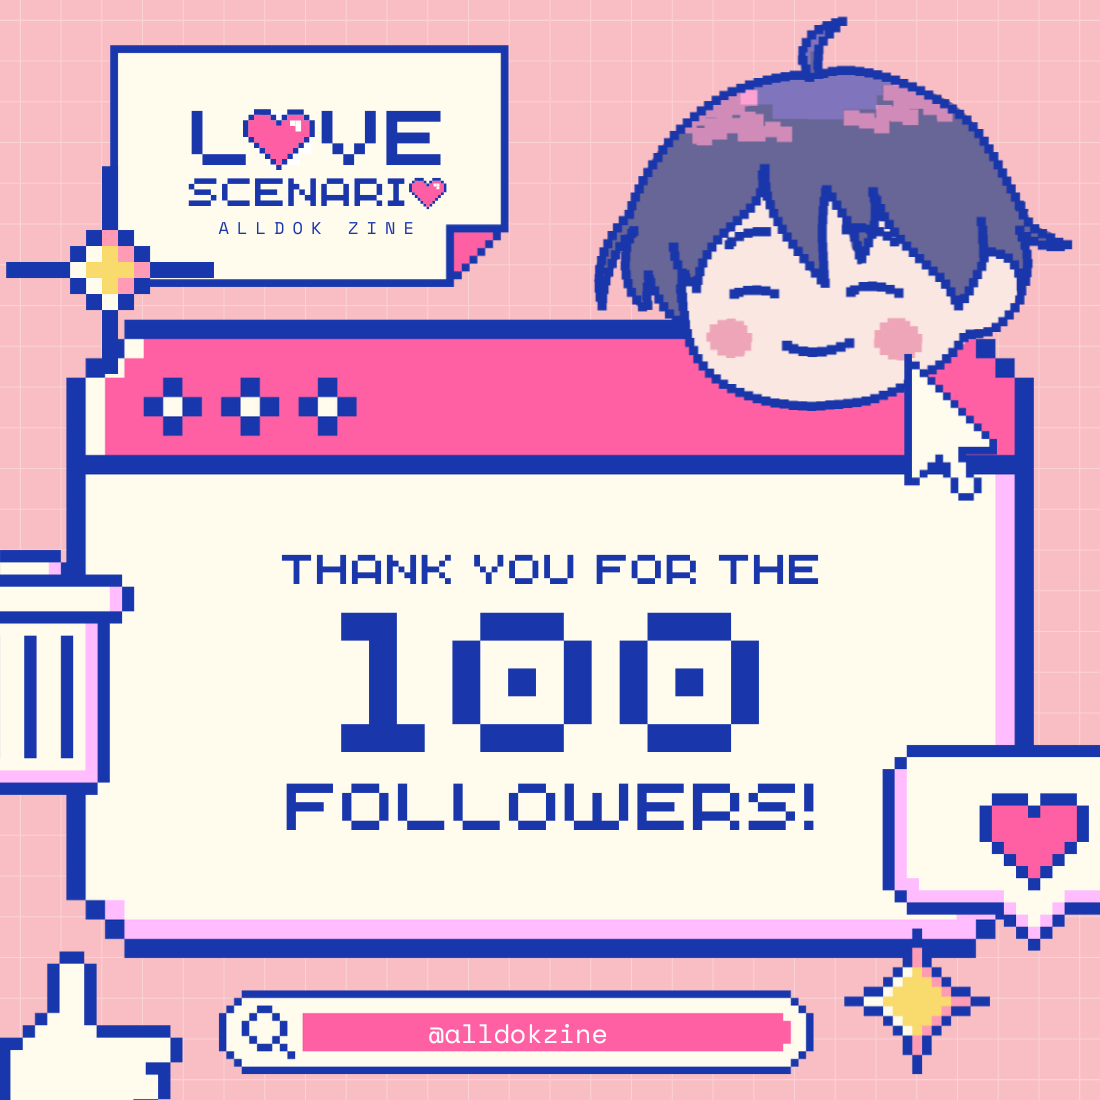 Thank you for over 100 followers already! We appreciate all your support 🩷 Don't forget to fill out our interest check! ✨ bit.ly/AllDokIC